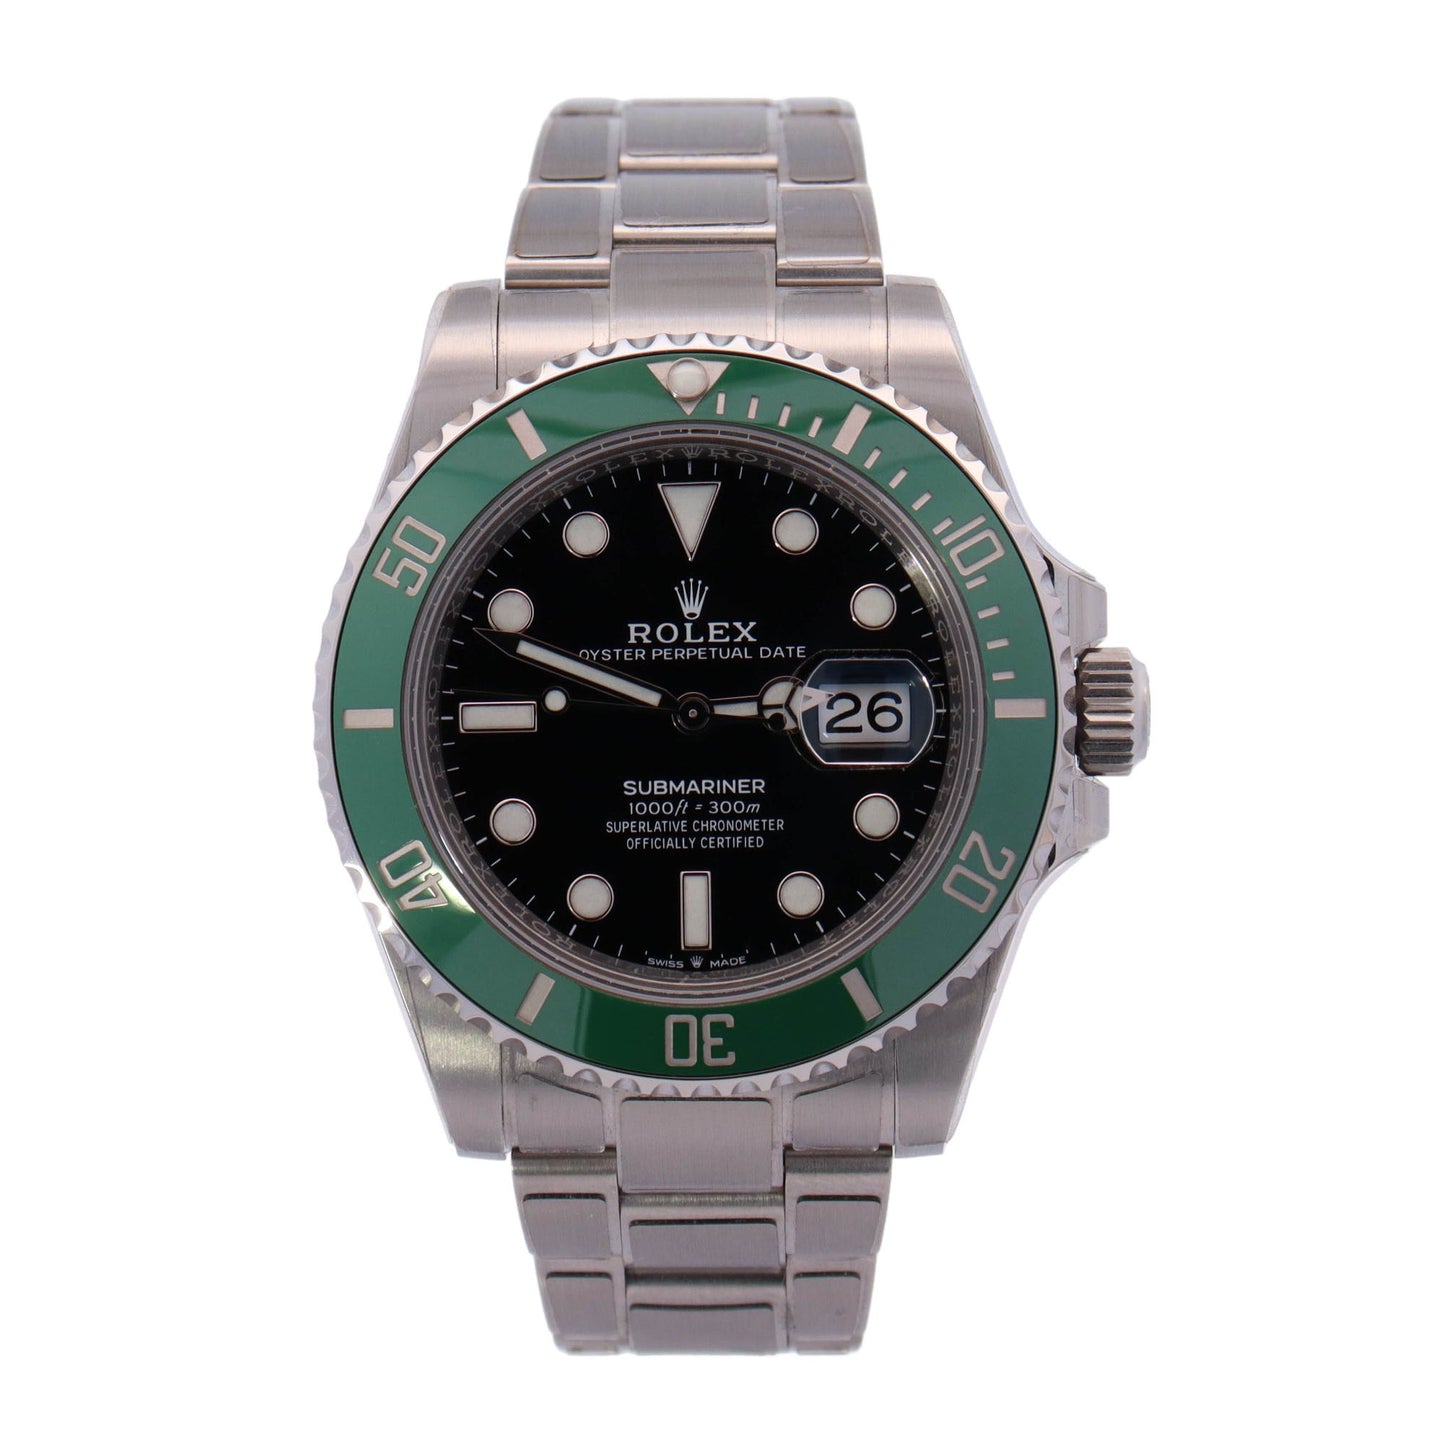 Rolex Submariner Date Stainless Steel 41mm Black Dot Dial Watch Reference #: 126610LV